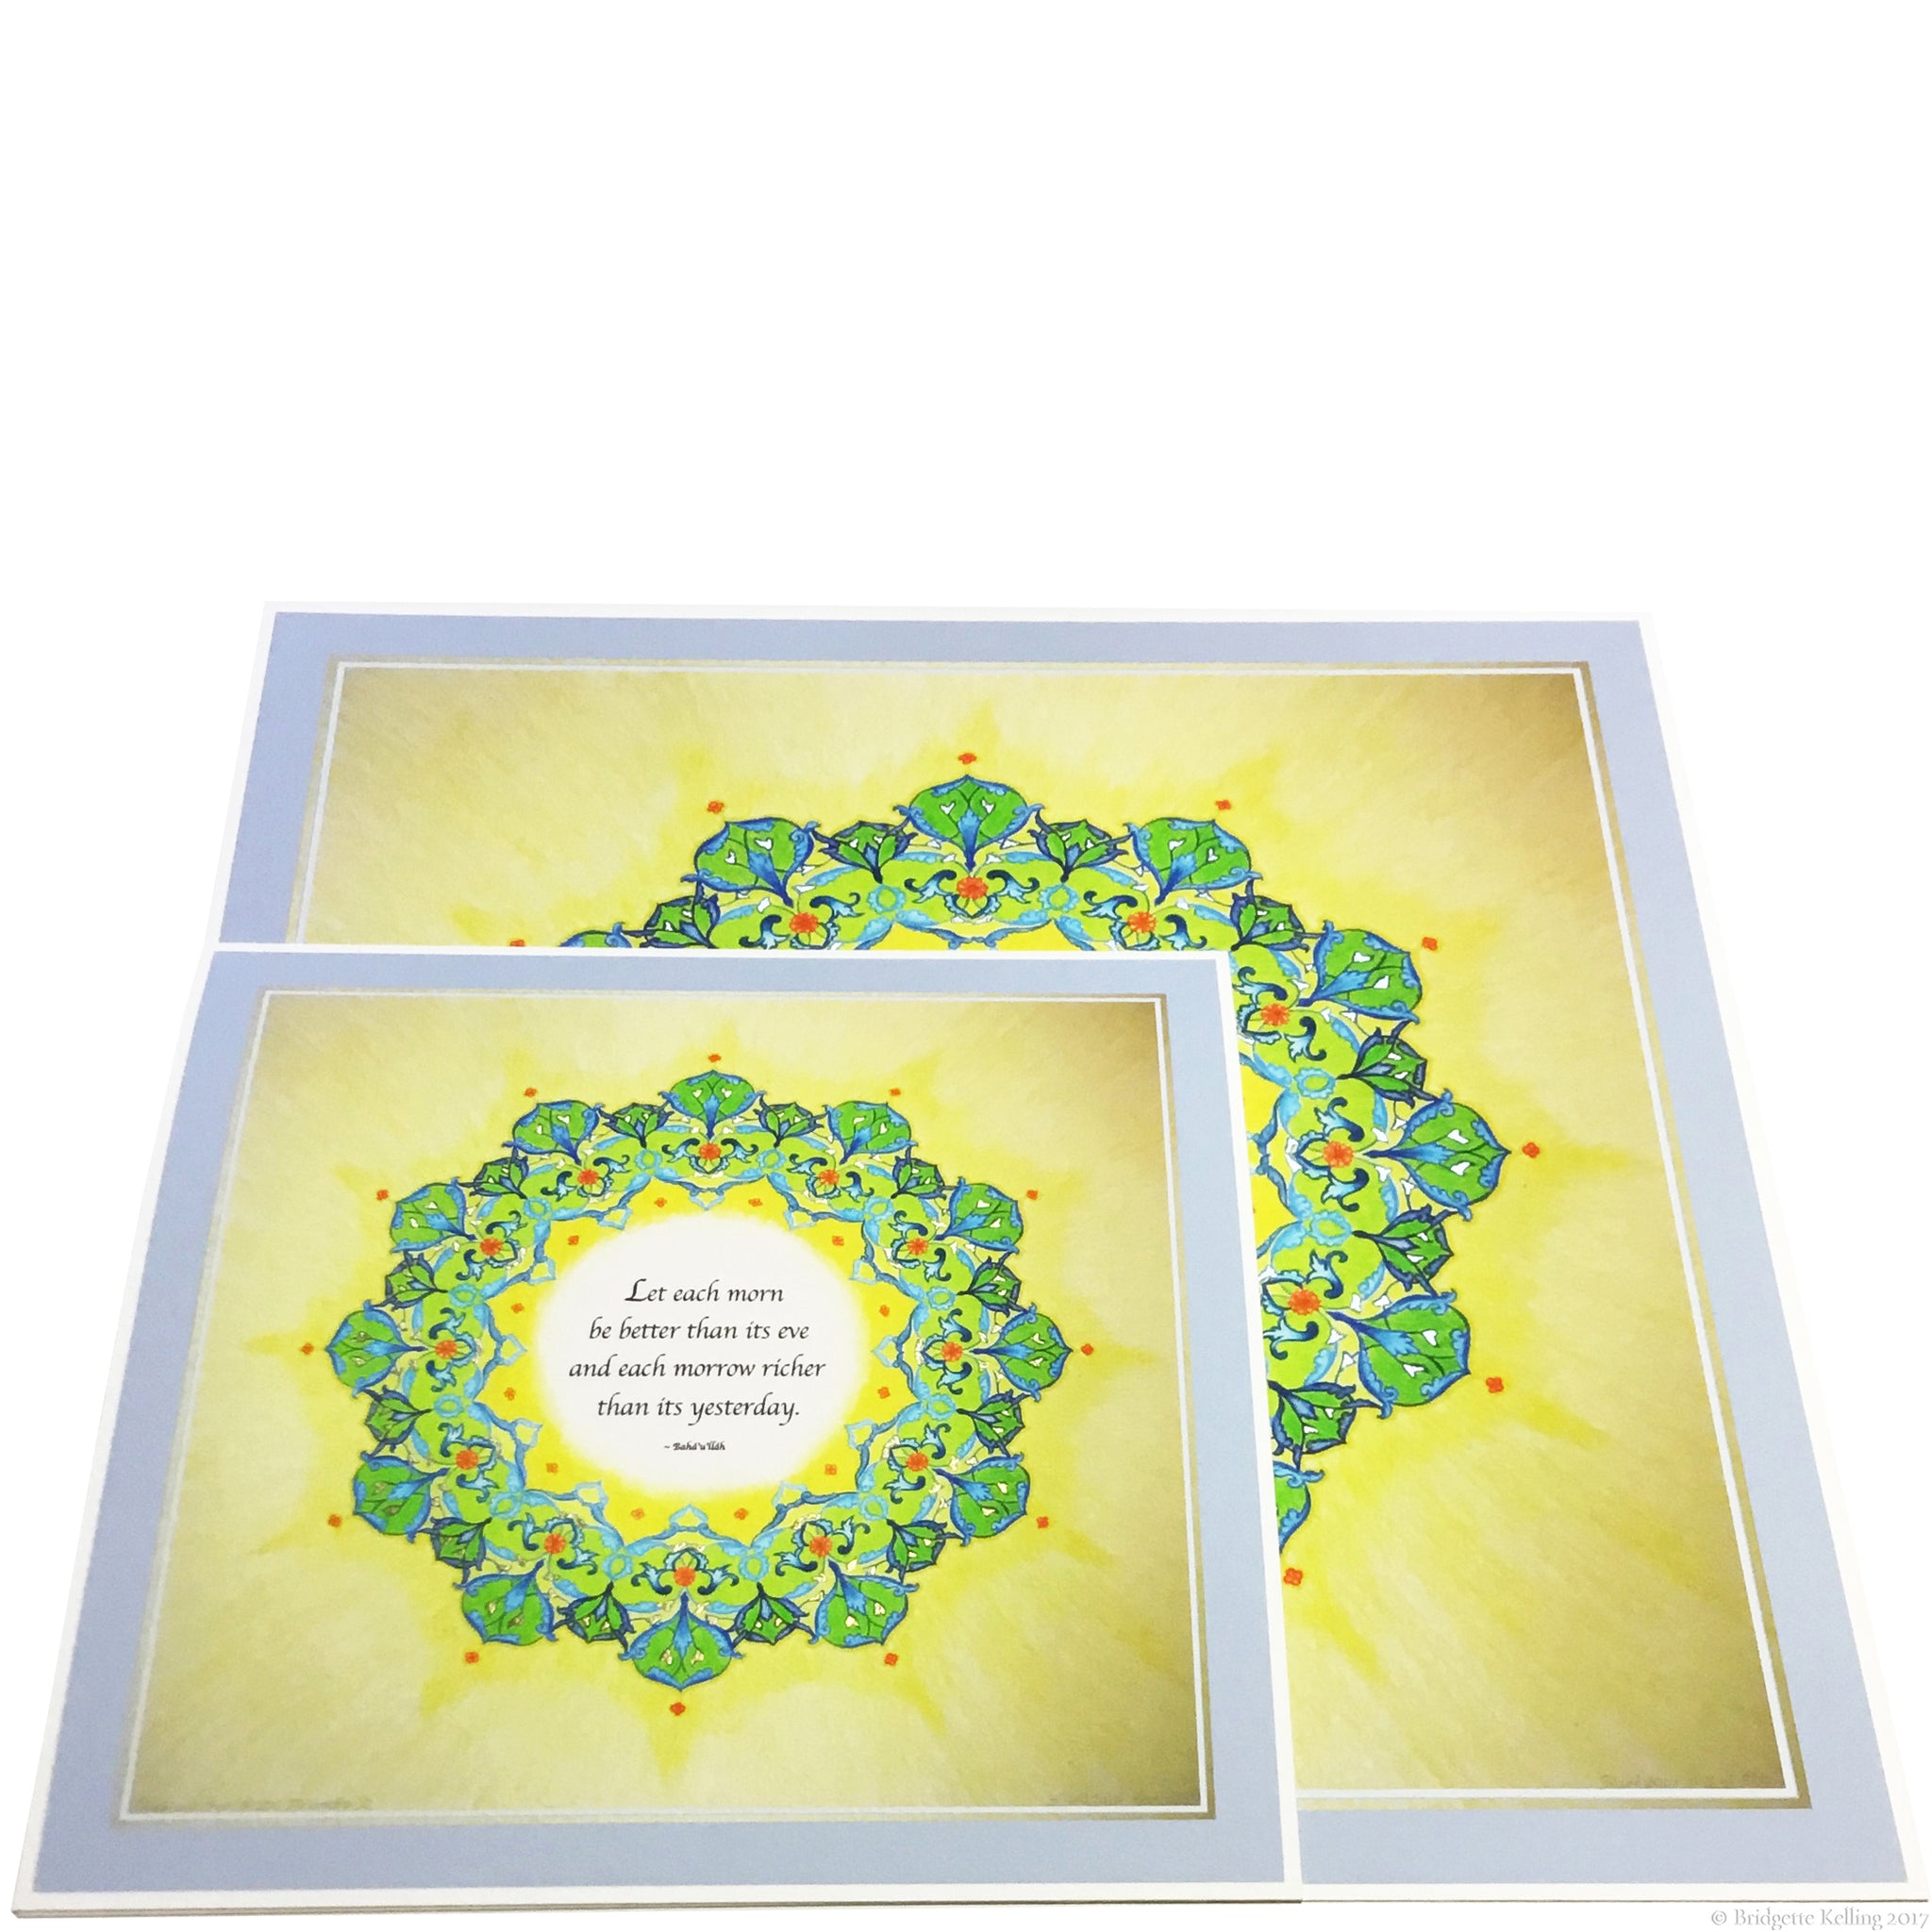 Green, yellow & 24 kt gold & palladium gilded mandalas with a Bahá’í quote on having a better day 8” x 8” - Color & Gold LLC © Bridgette Kelling